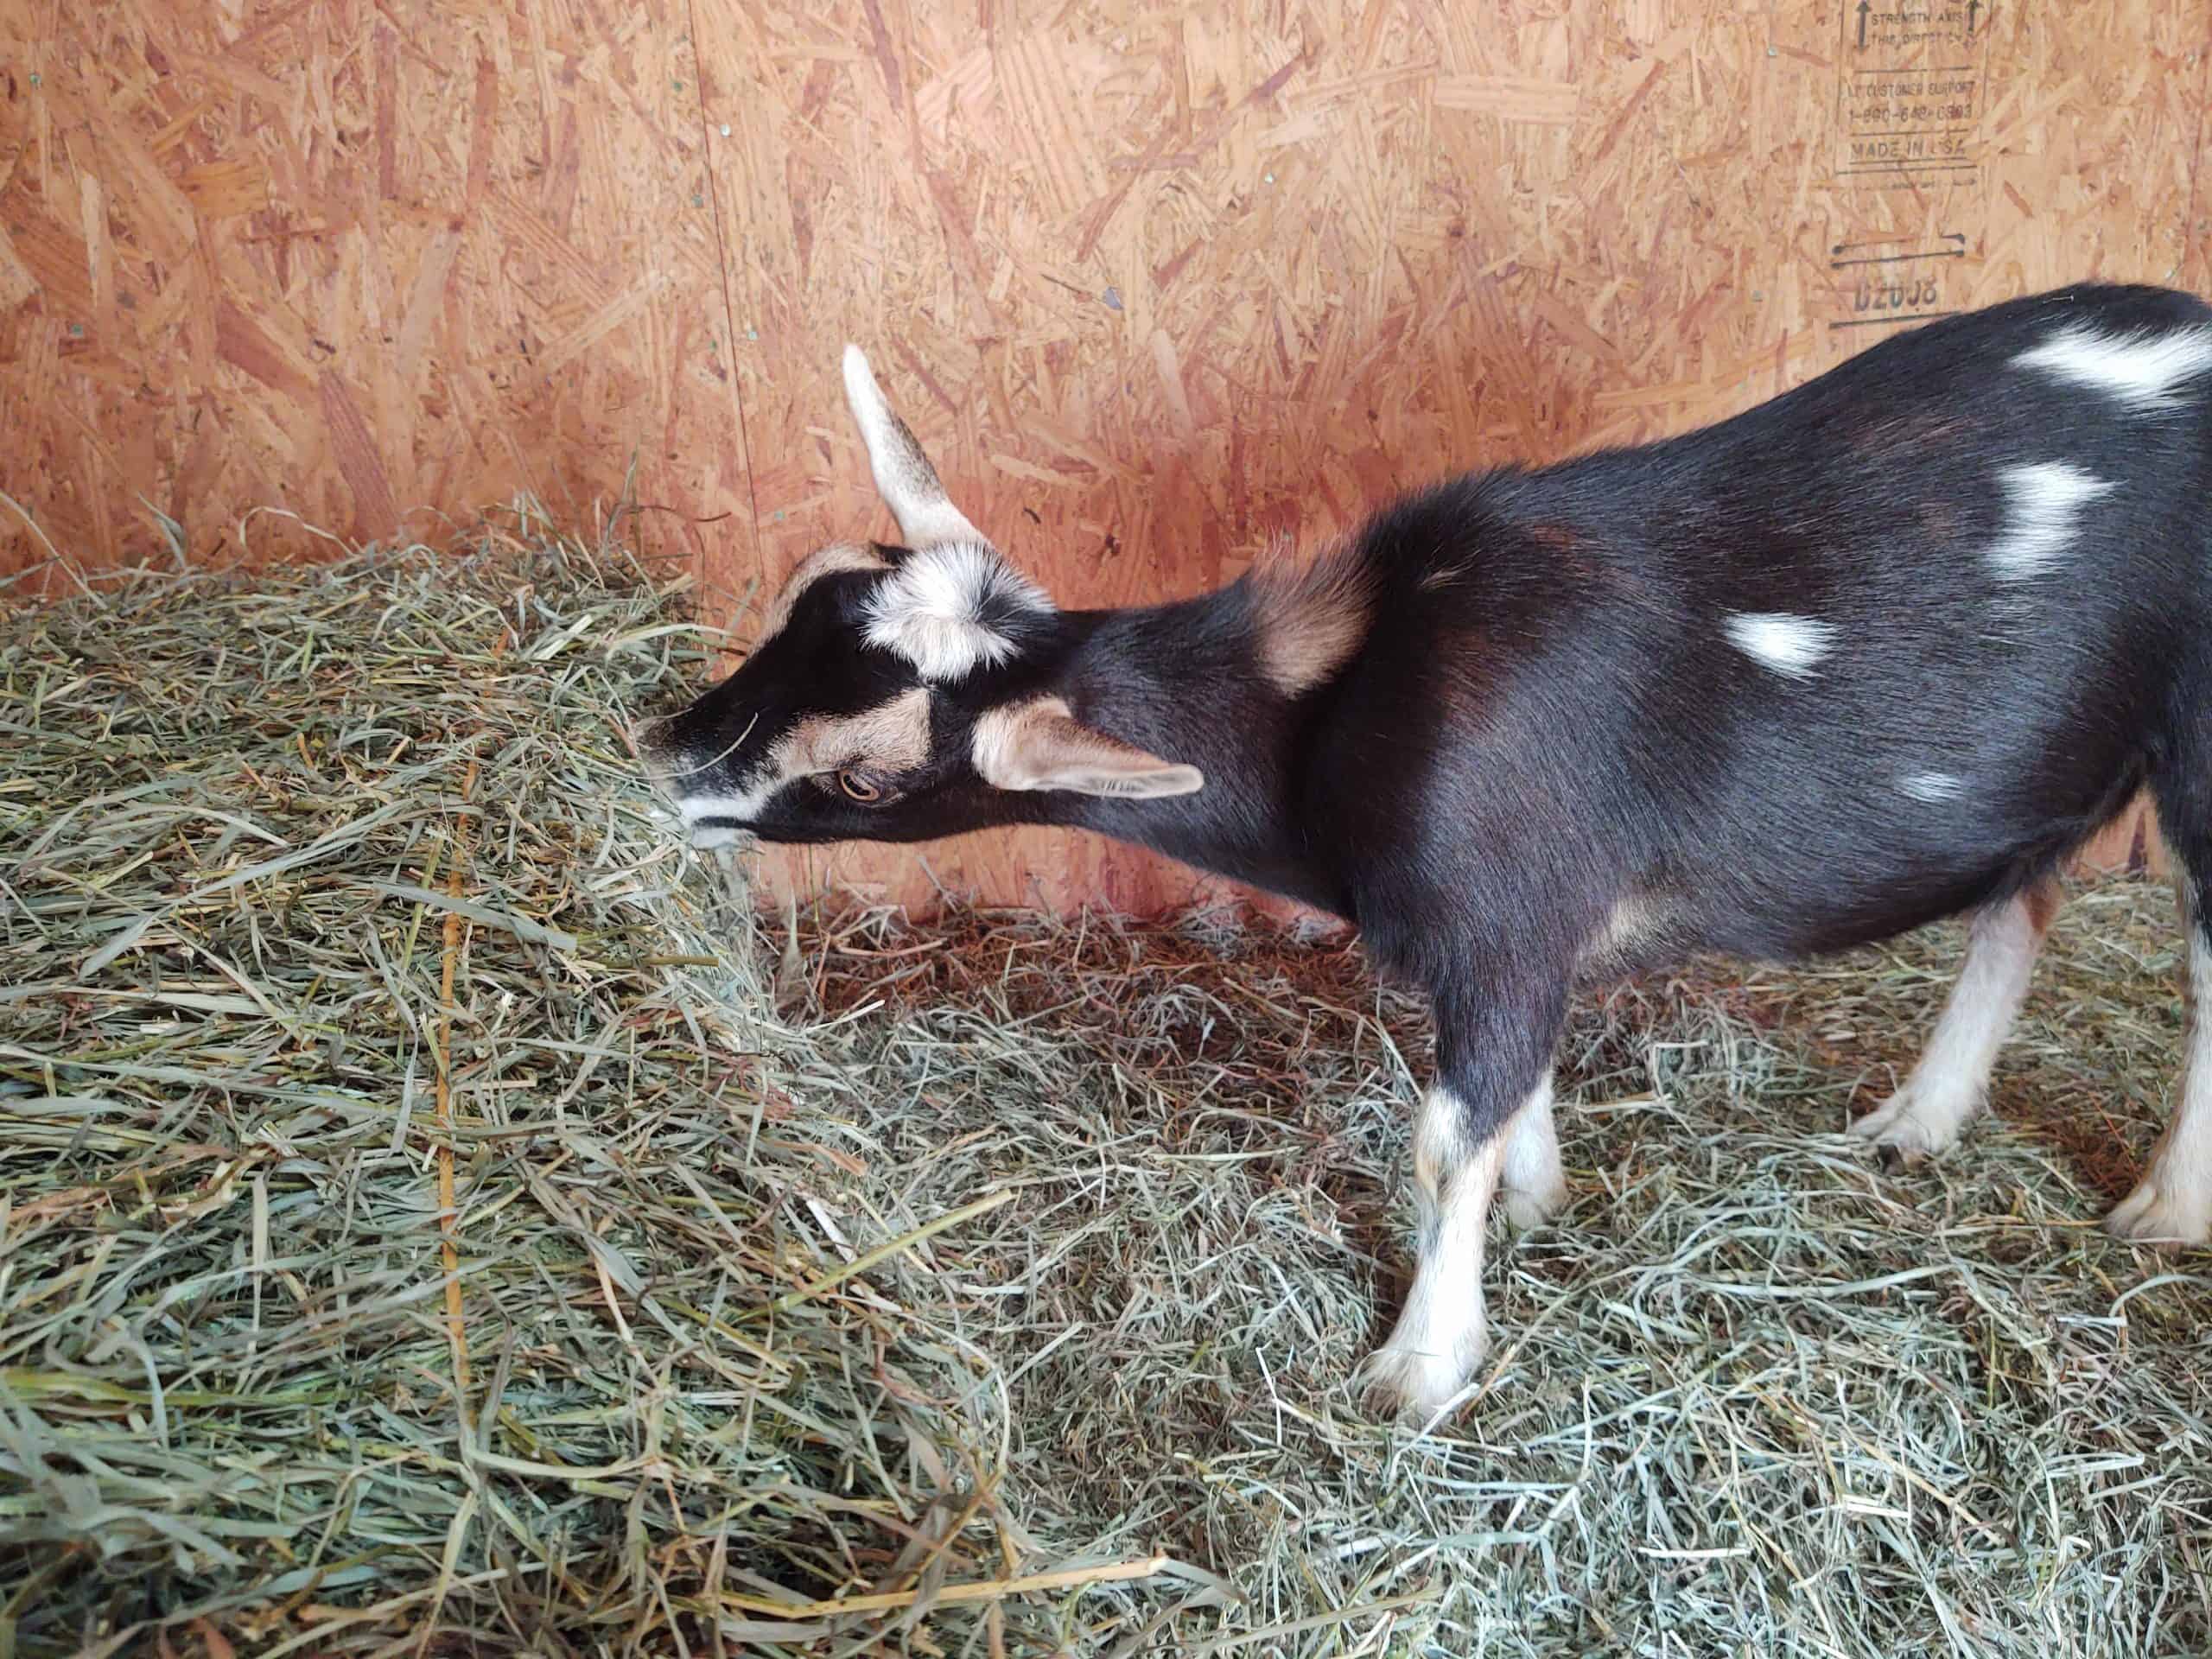 goat standing on hay bale eating hay